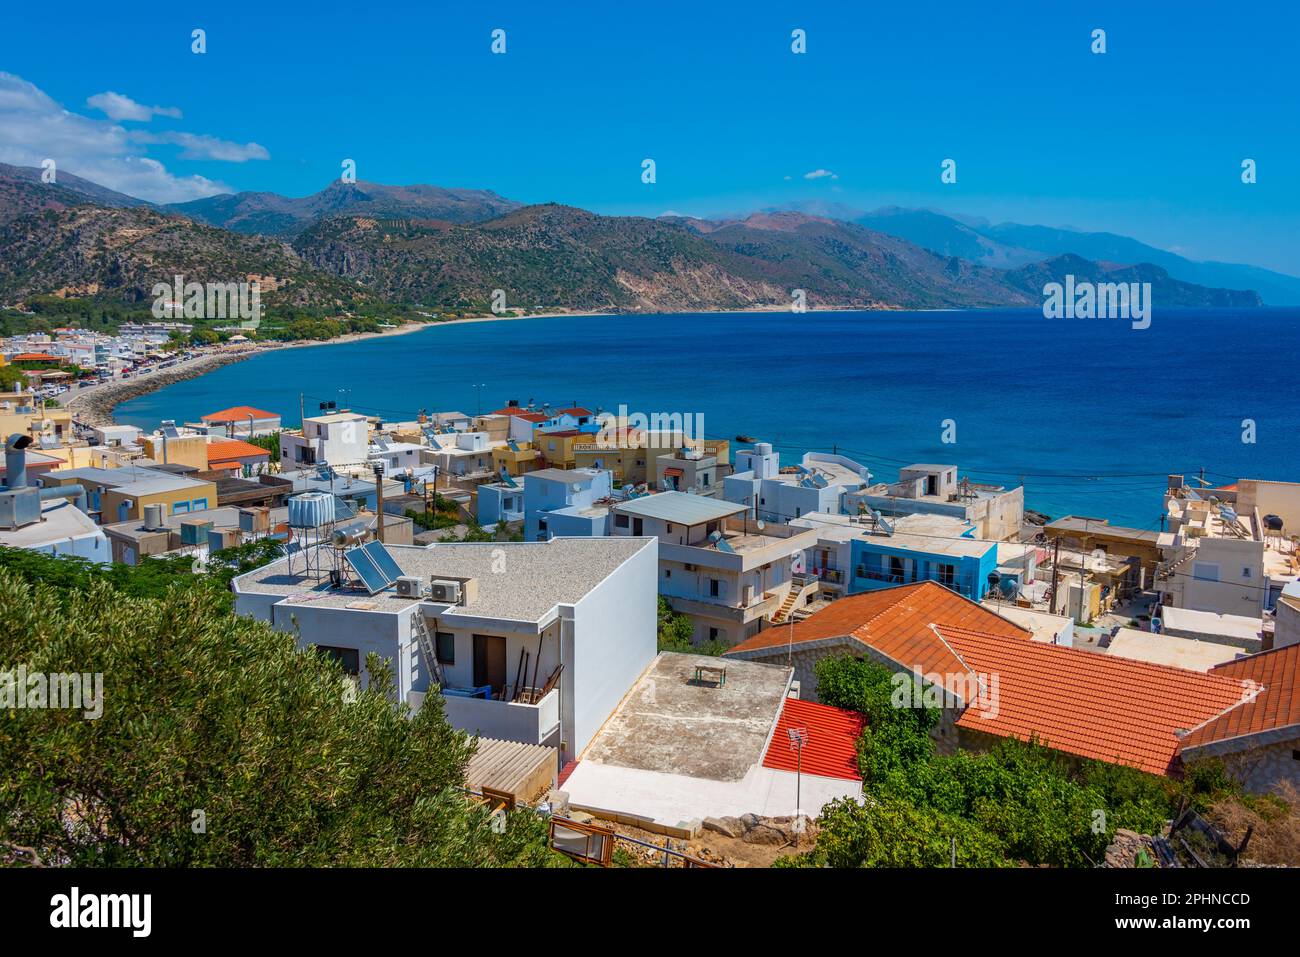 Aerial view of Greek town Palaiochora. Stock Photo